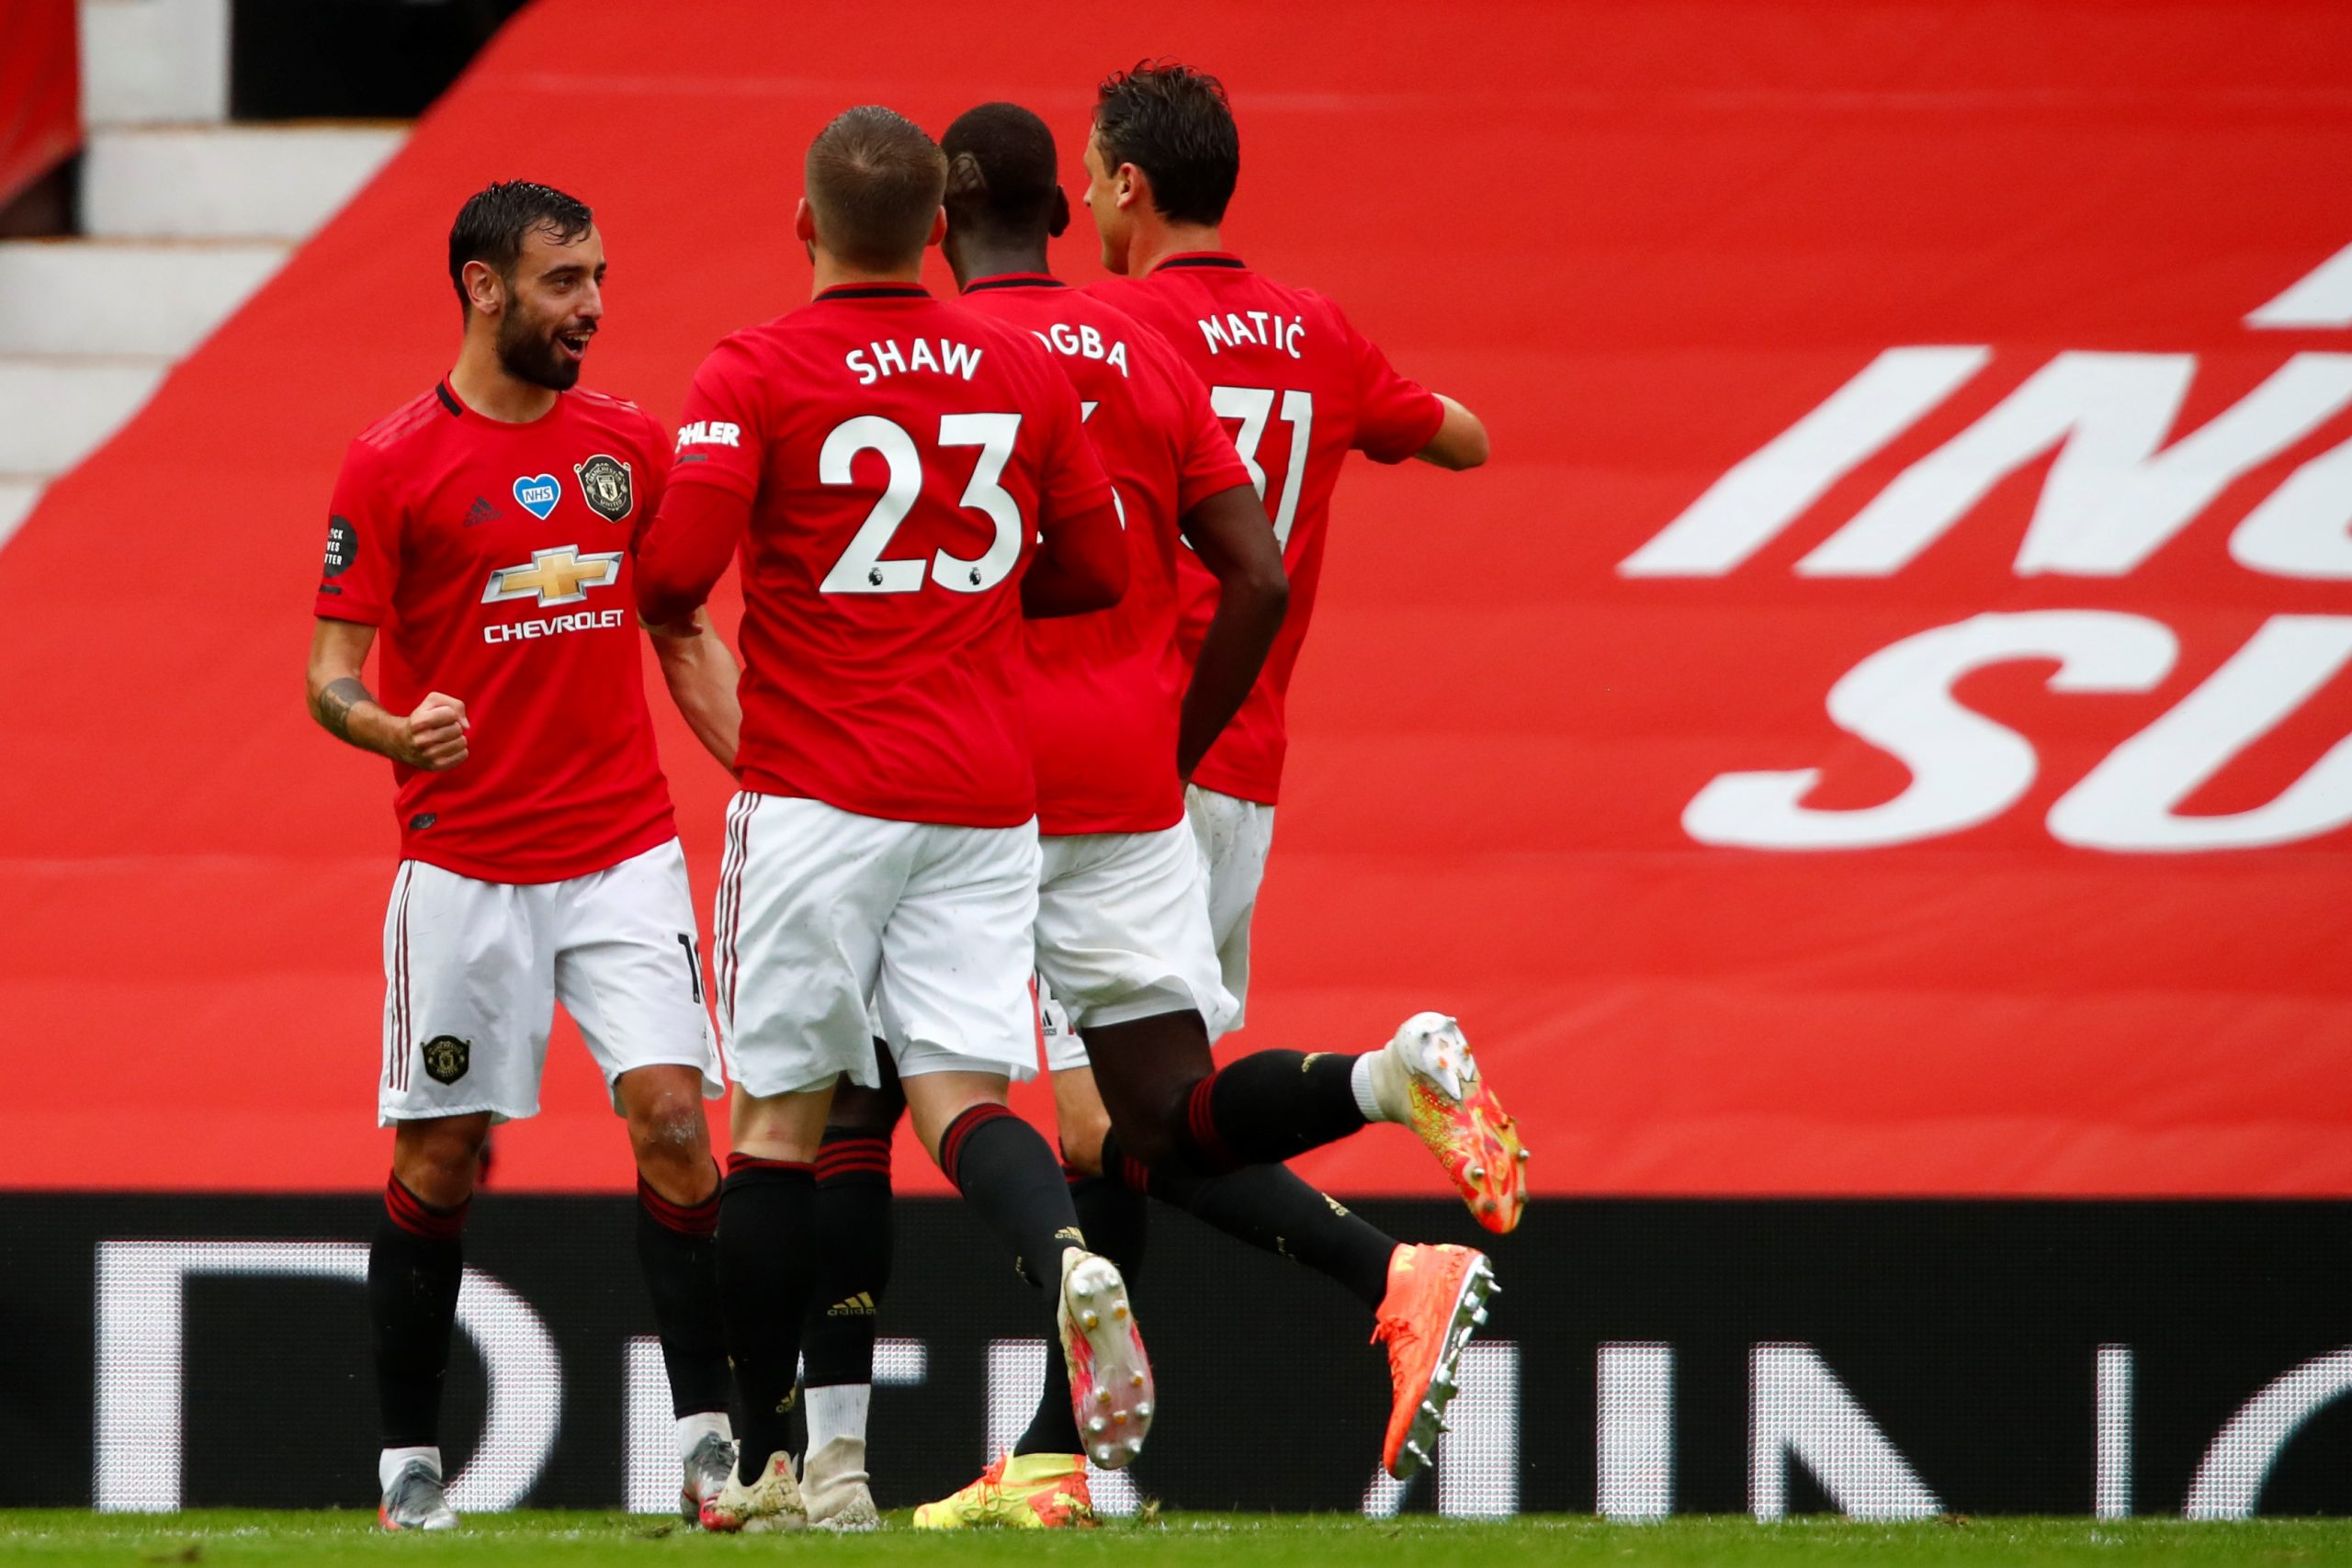 Crystal Palace Vs Manchester United Tactical Preview (Man United players celebrating in the picture)